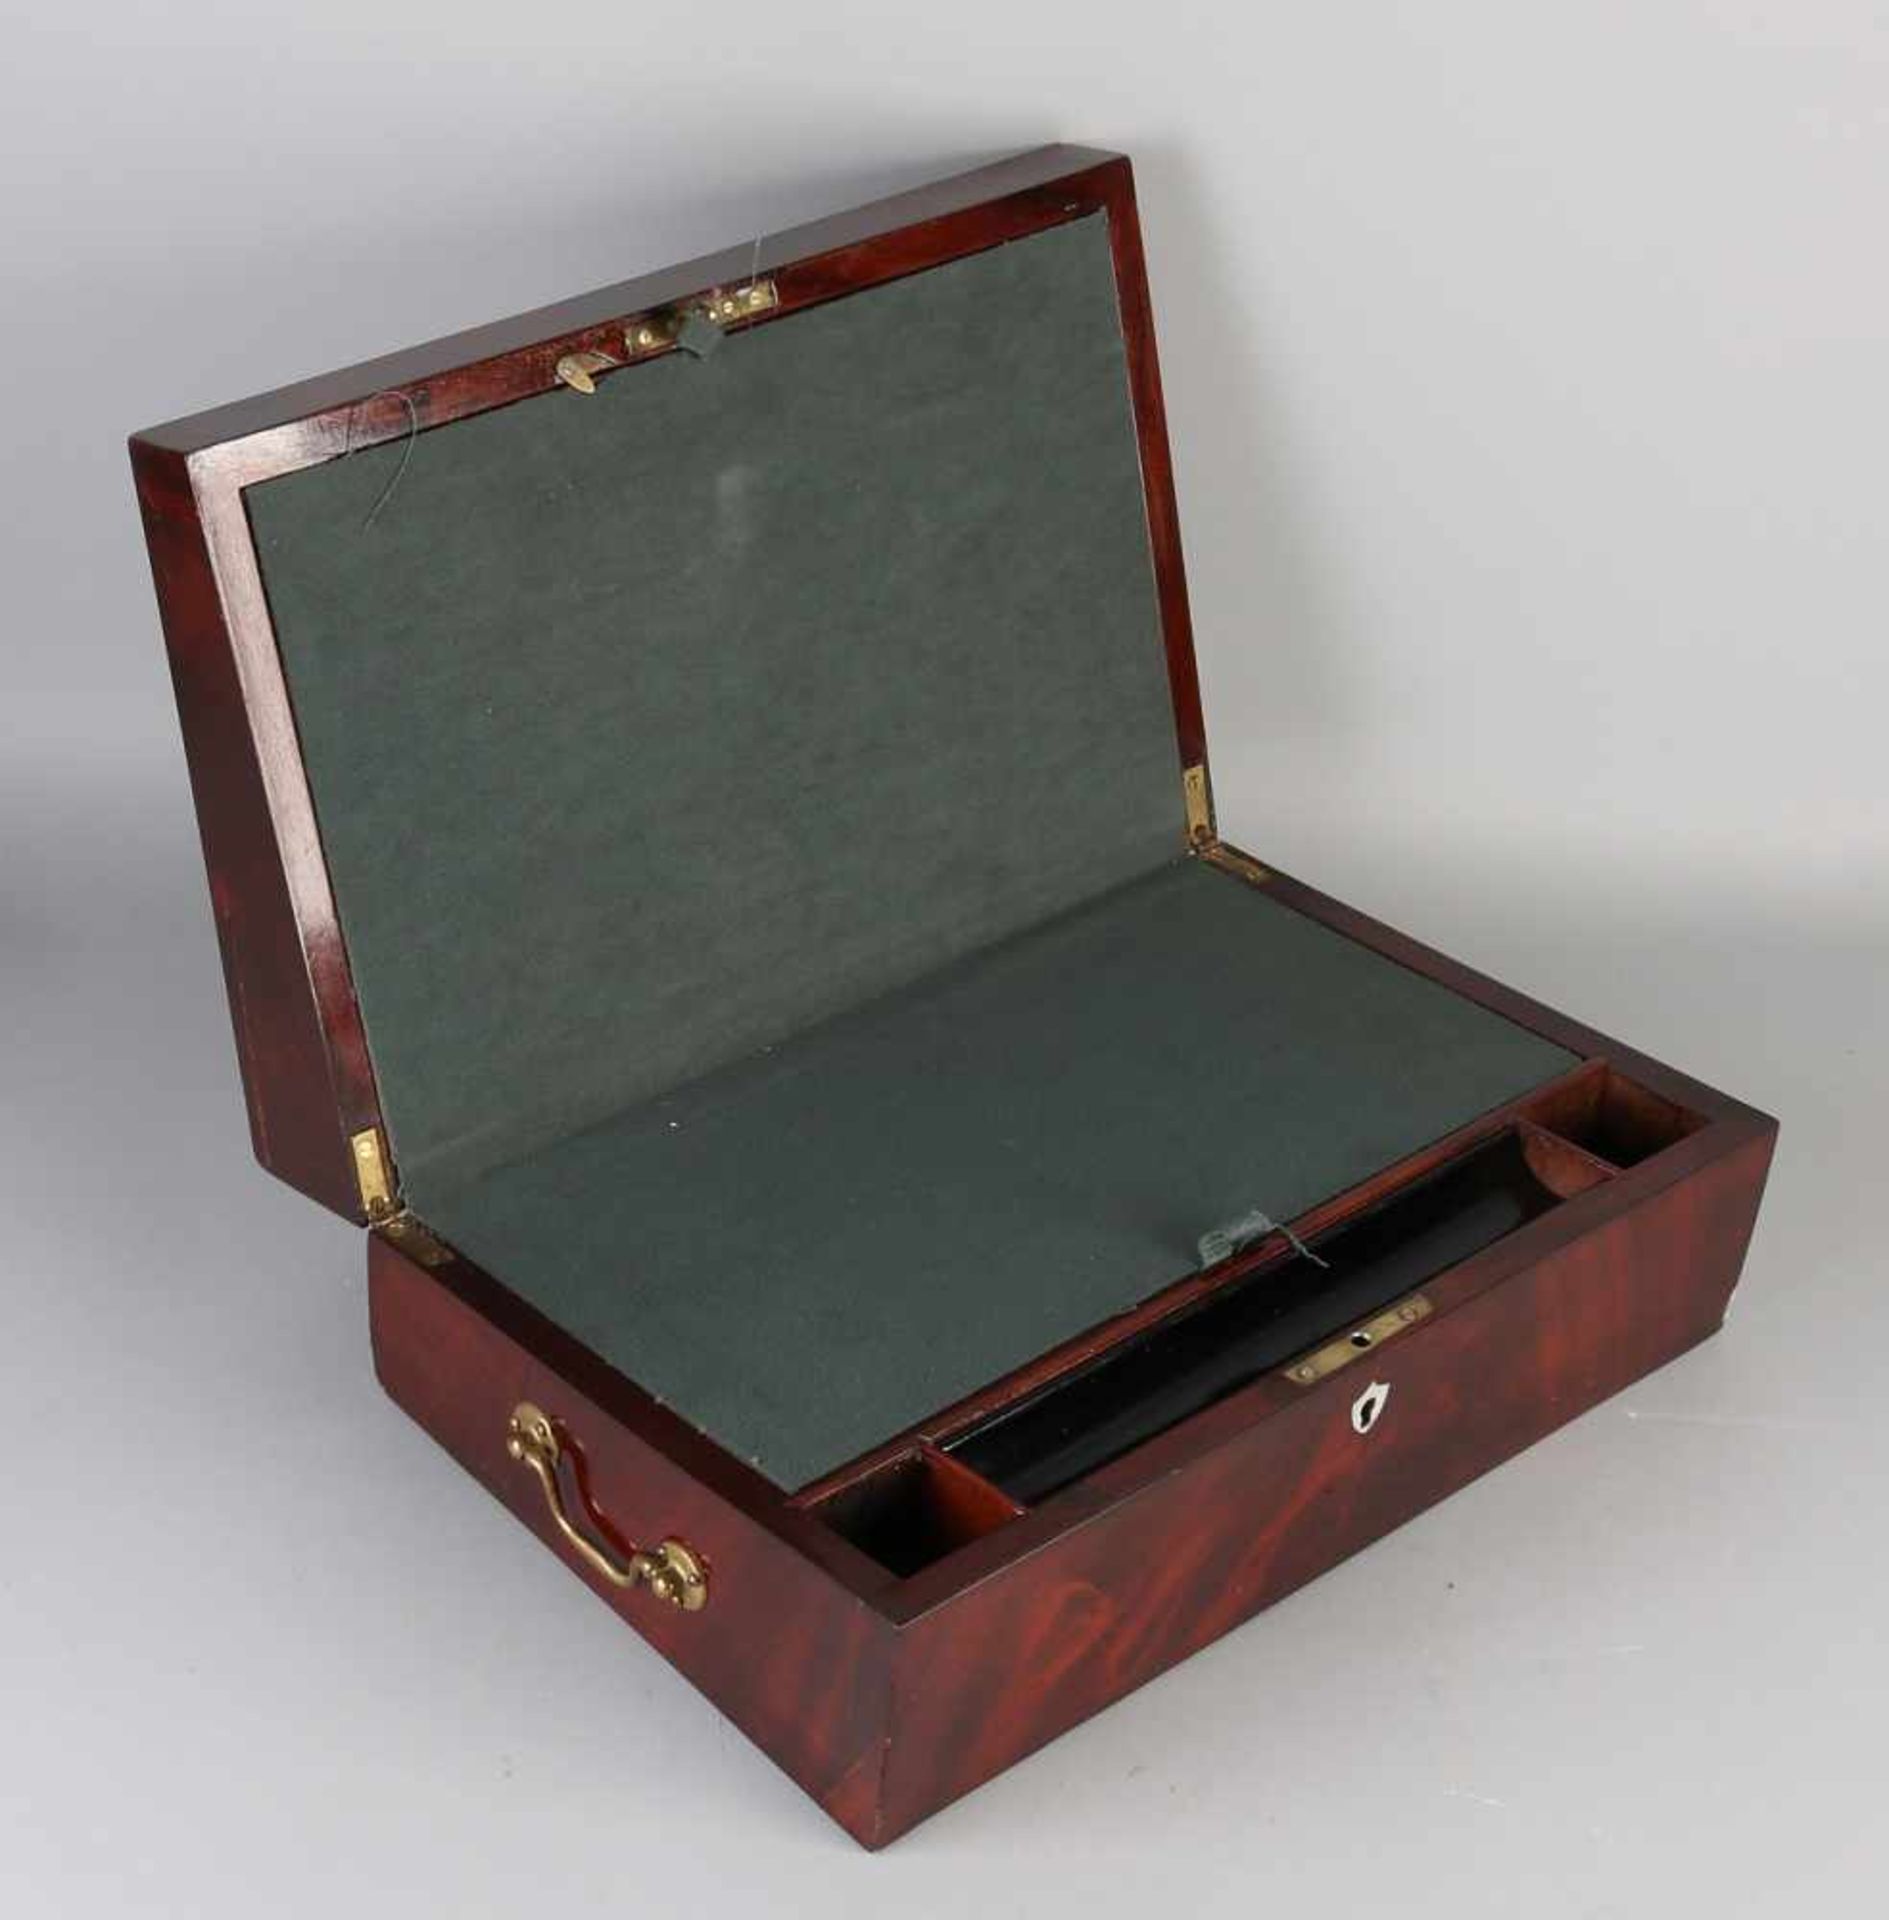 19th Century English travel writing polished coffin. Size: 14 x 40 x 25 cm. In very good condition.